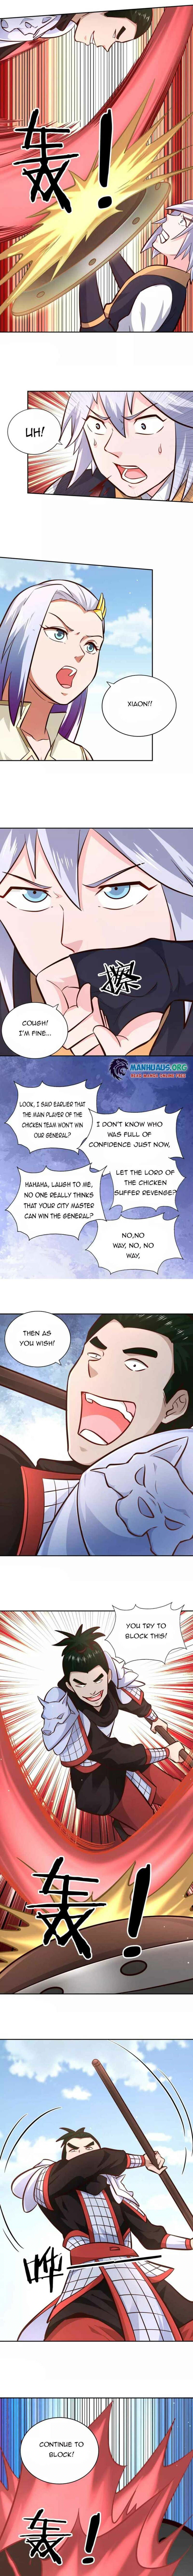 Wu Ling Sword Master Chapter 94 page 3